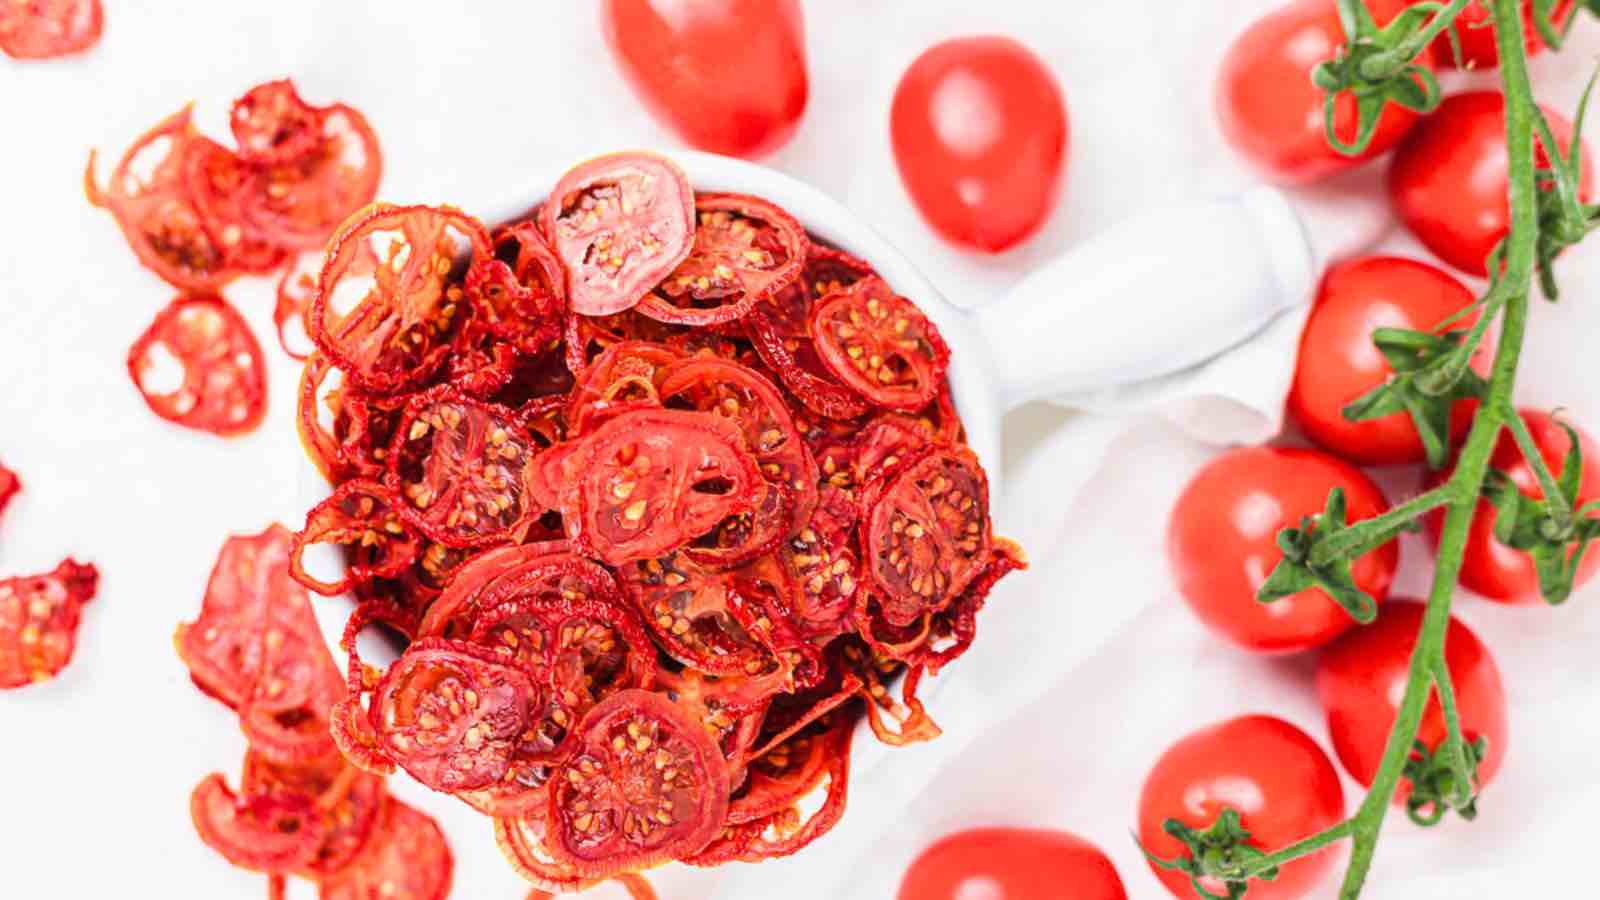 Dried tomatoes in a bowl on a white surface.